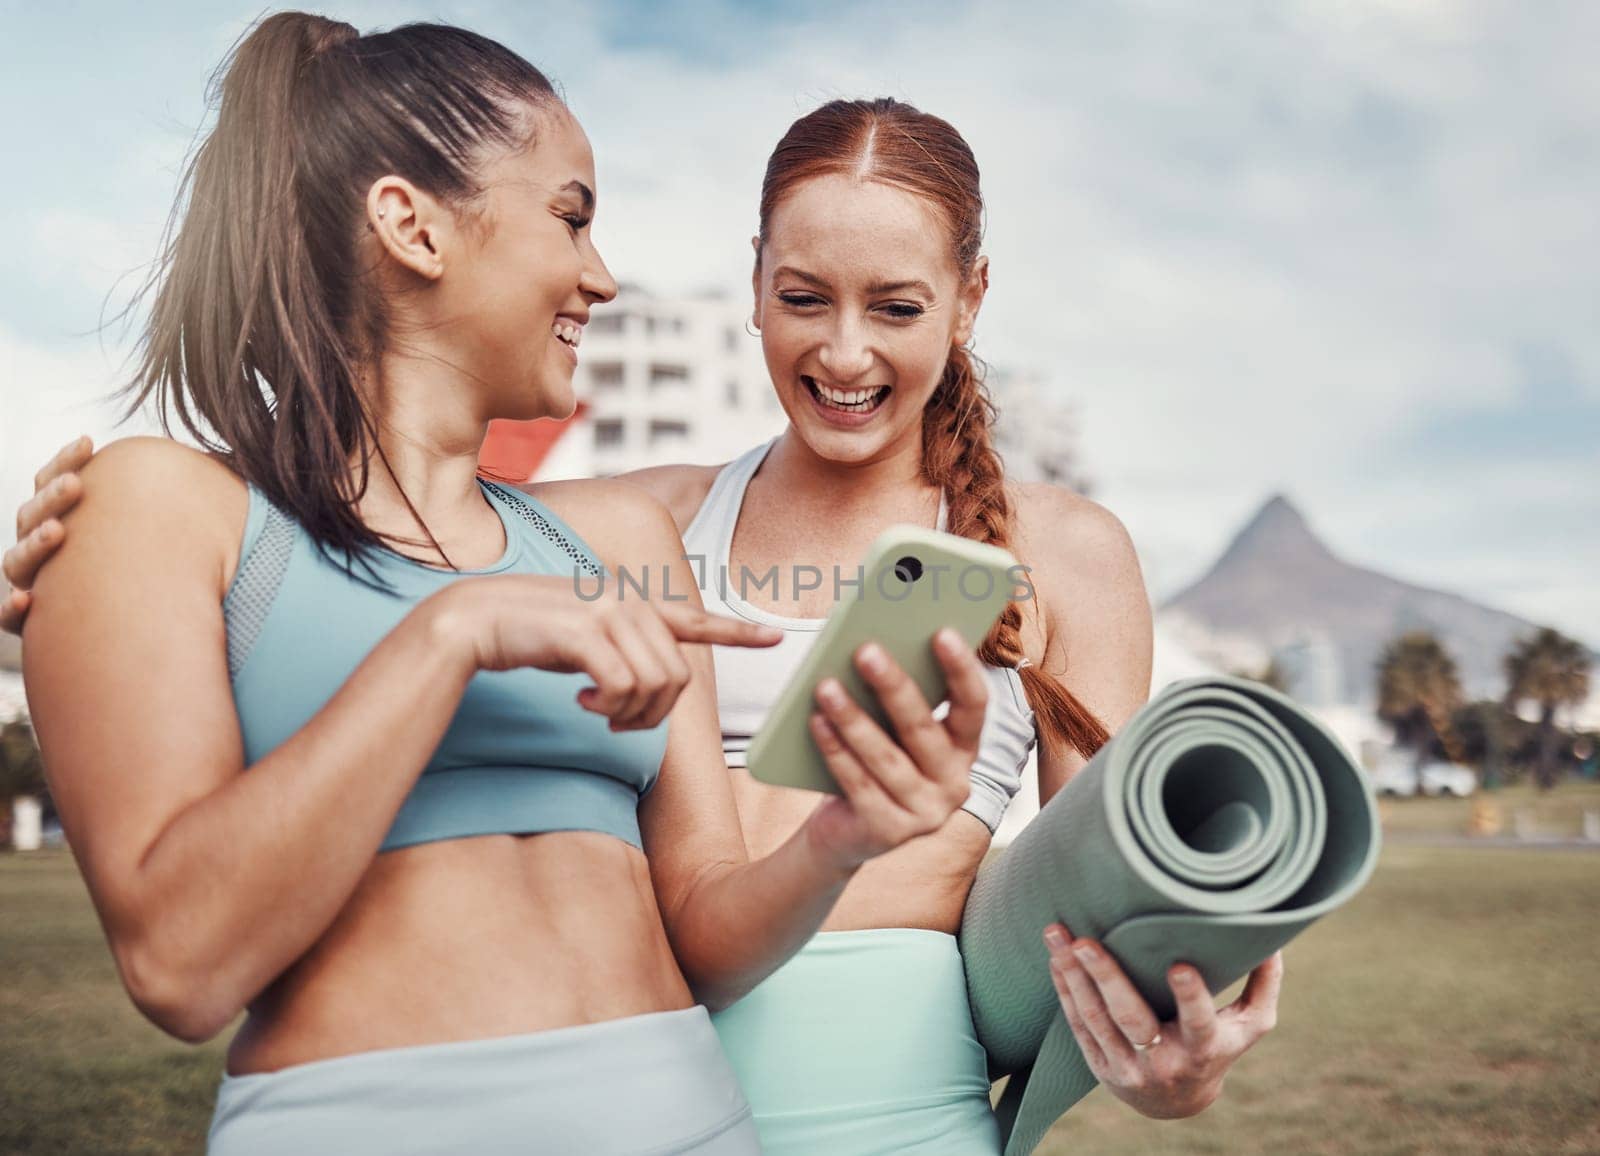 Yoga, fitness and social media with woman friends in the park together for mental health exercise. Exercise, phone and training with a female and friend outside on a grass field for a summer workout.